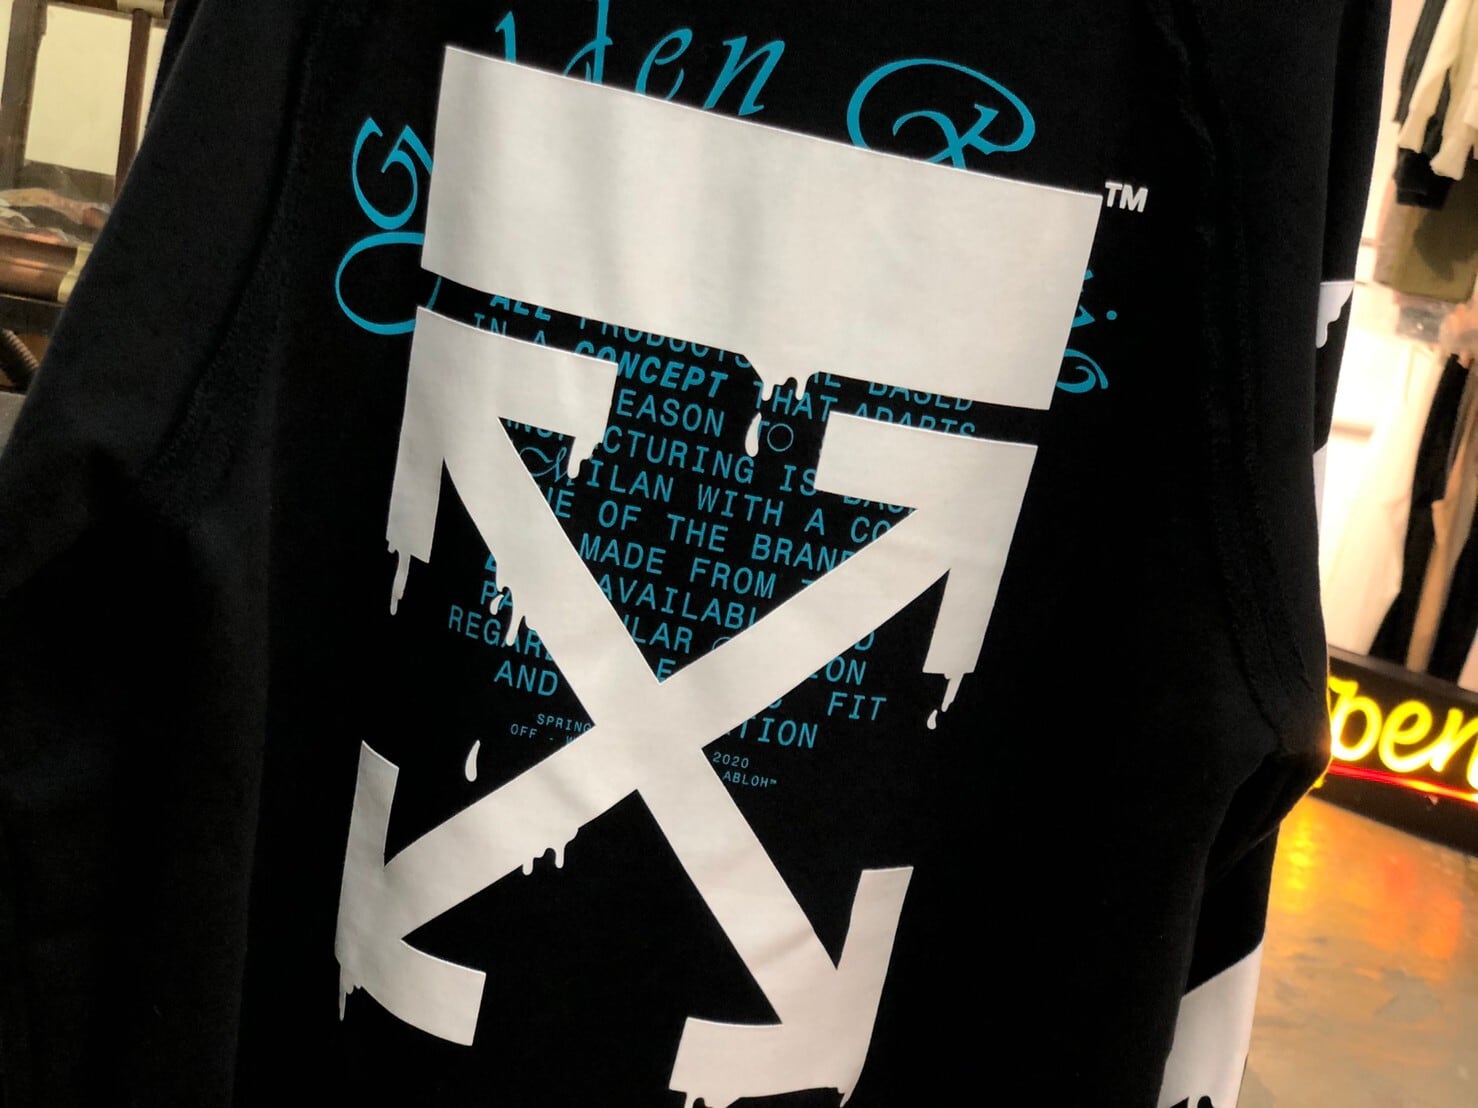 off-white for all アローズ Tシャツ 黒 XS